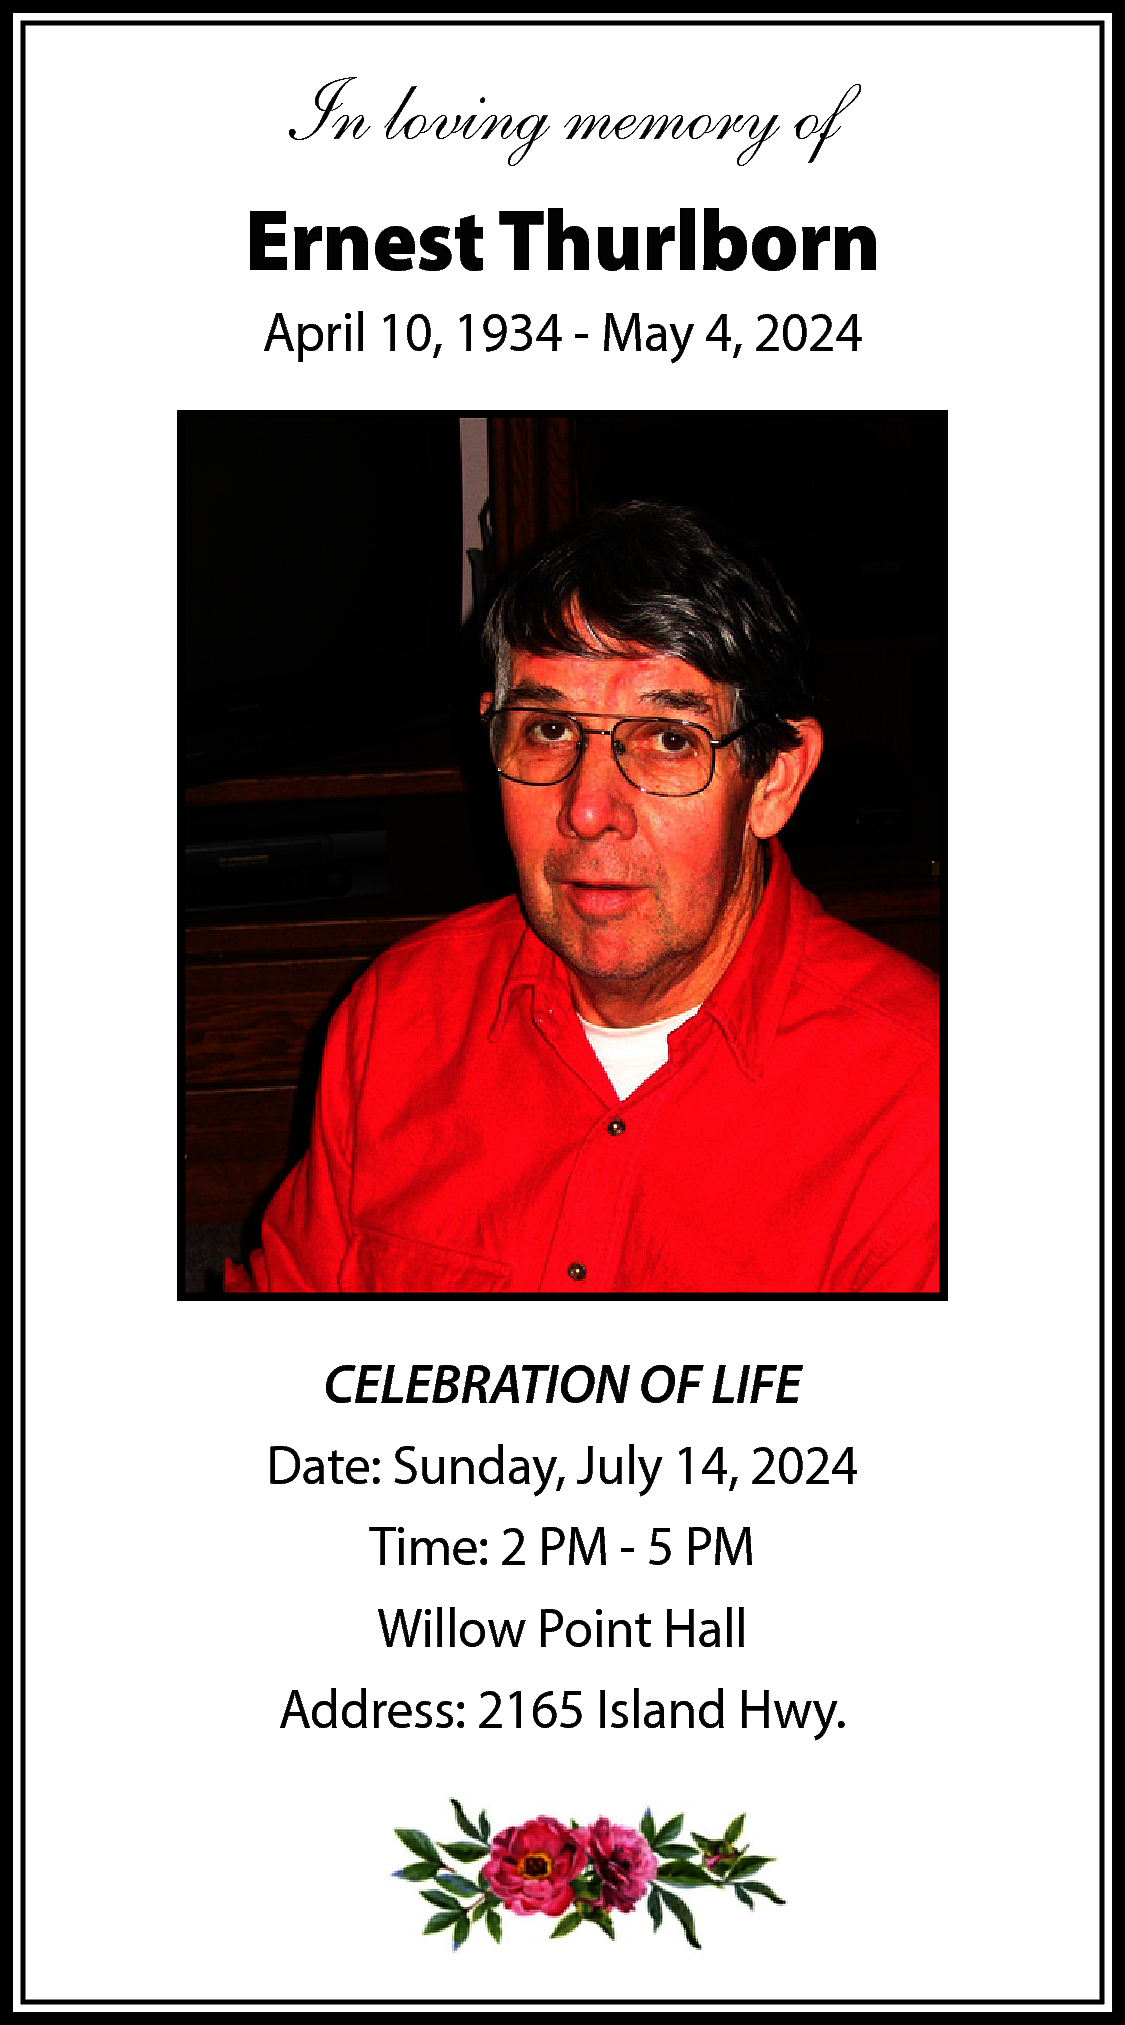 In loving memory of <br>Ernest  In loving memory of  Ernest Thurlborn  April 10, 1934 - May 4, 2024    CELEBRATION OF LIFE  Date: Sunday, July 14, 2024  Time: 2 PM - 5 PM  Willow Point Hall  Address: 2165 Island Hwy.    